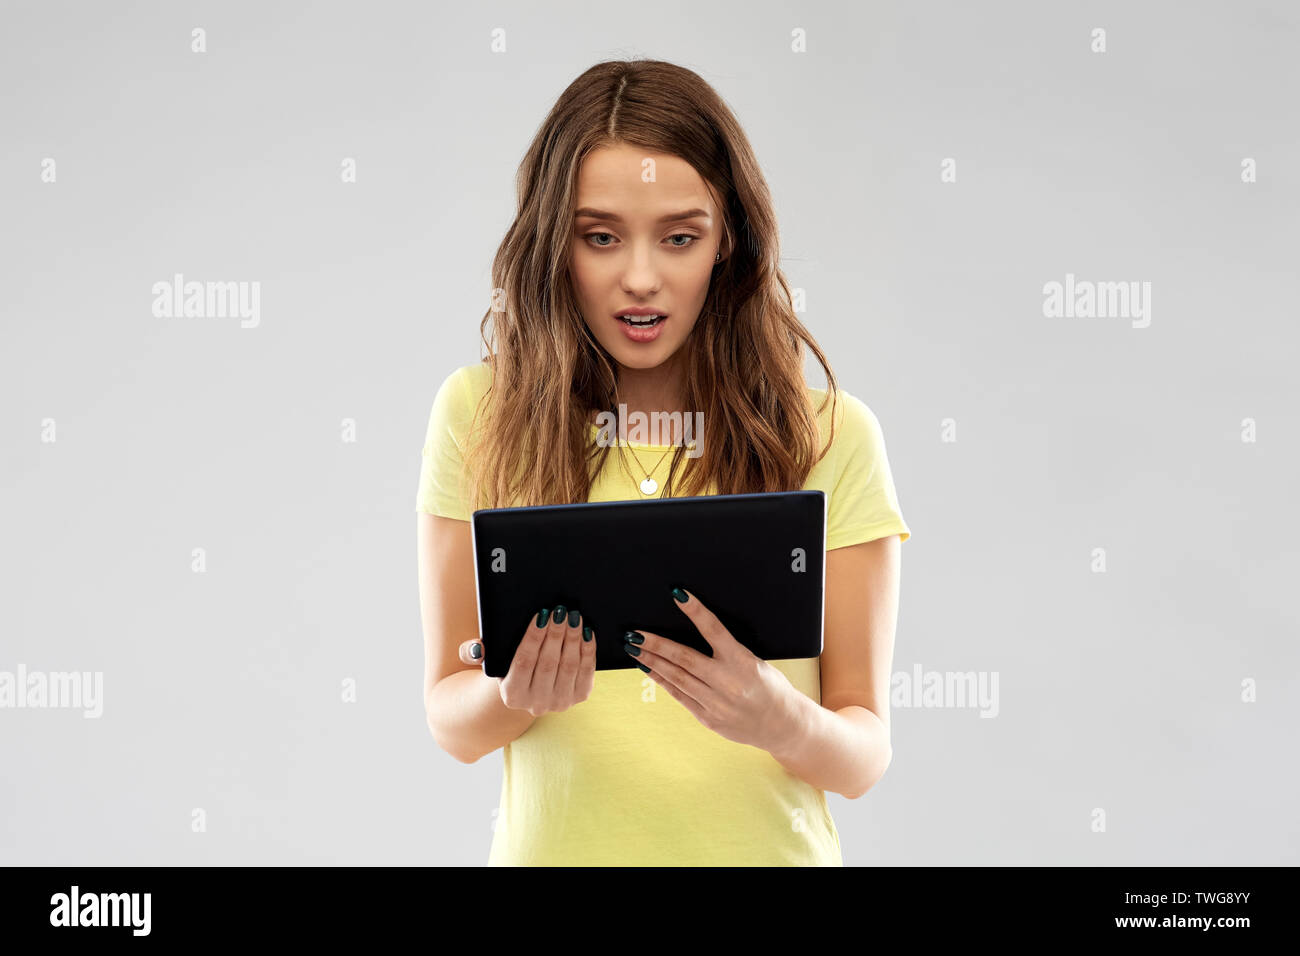 young woman or teenage girl using tablet computer Stock Photo